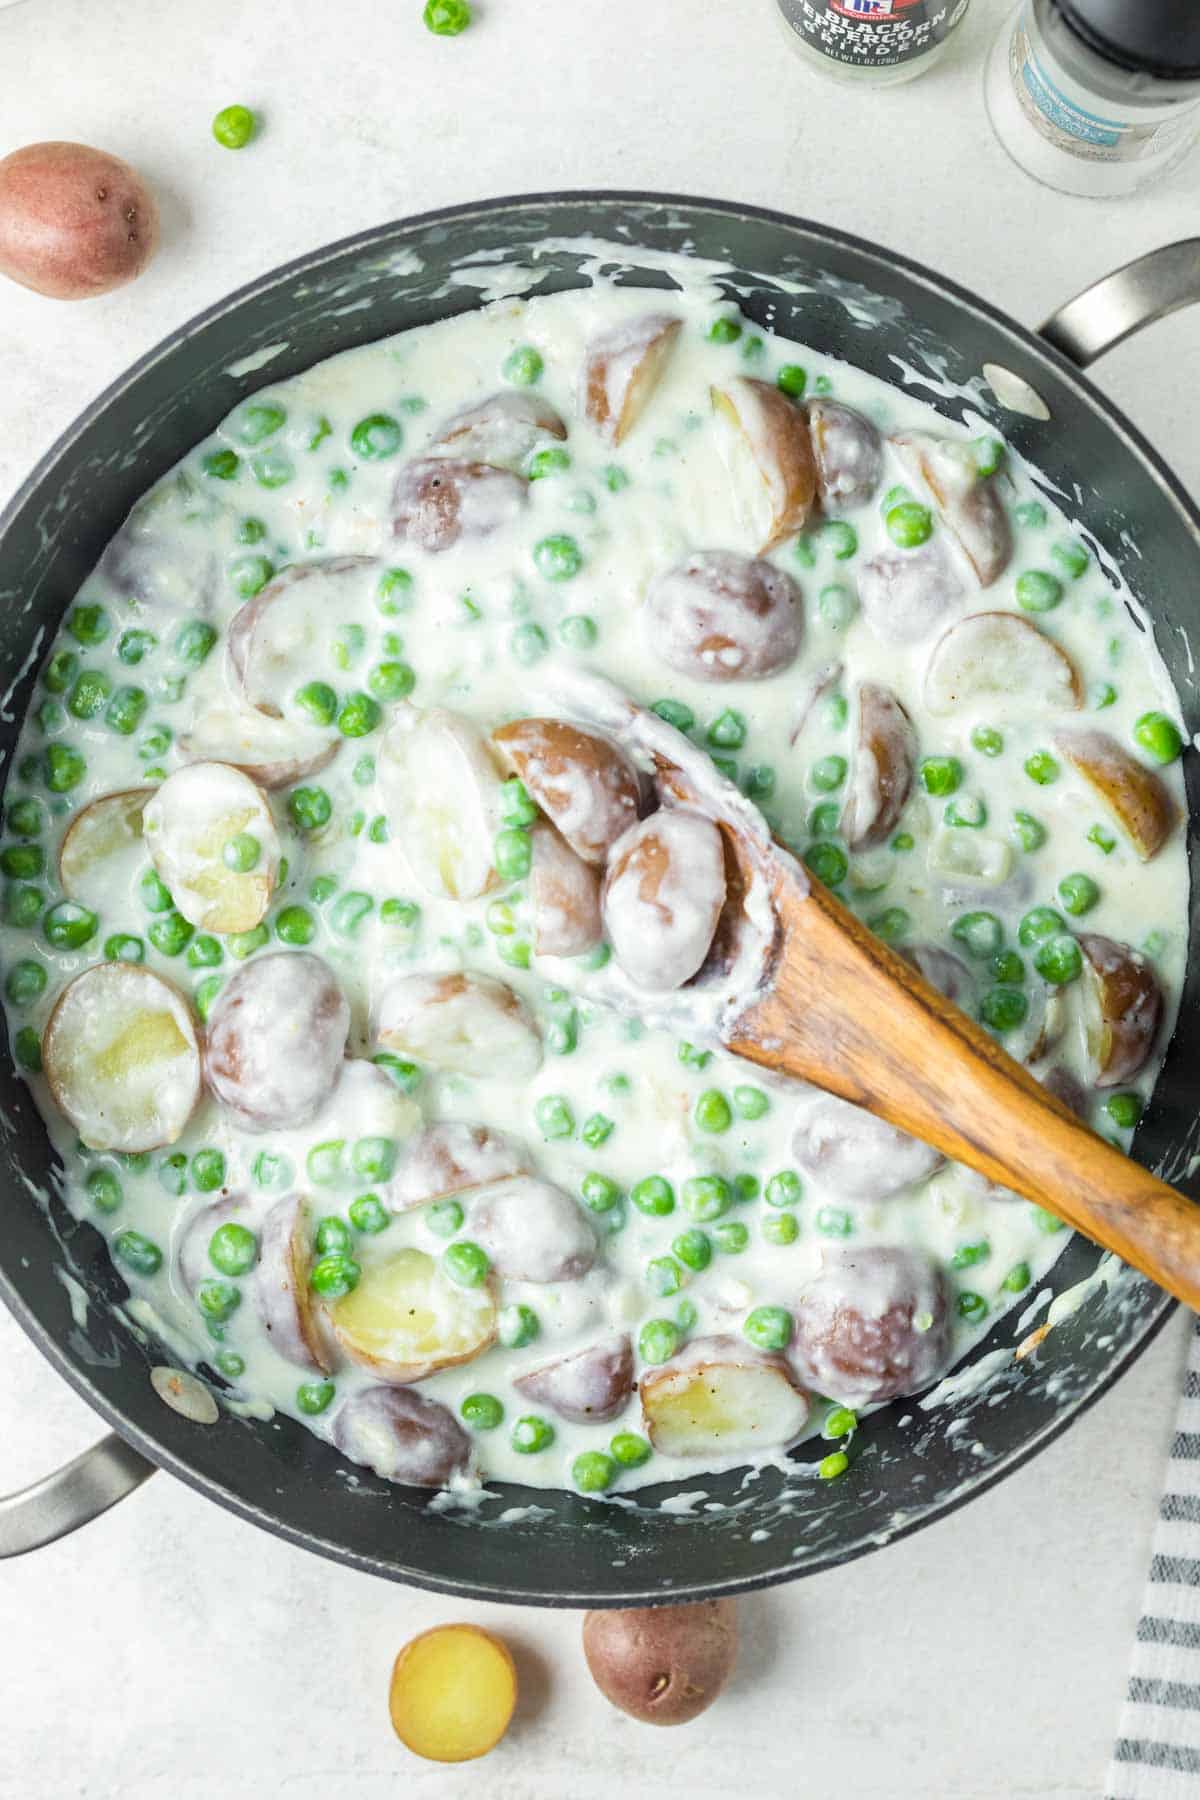 Creamed peas and potatoes in a skillet on a marble surface.